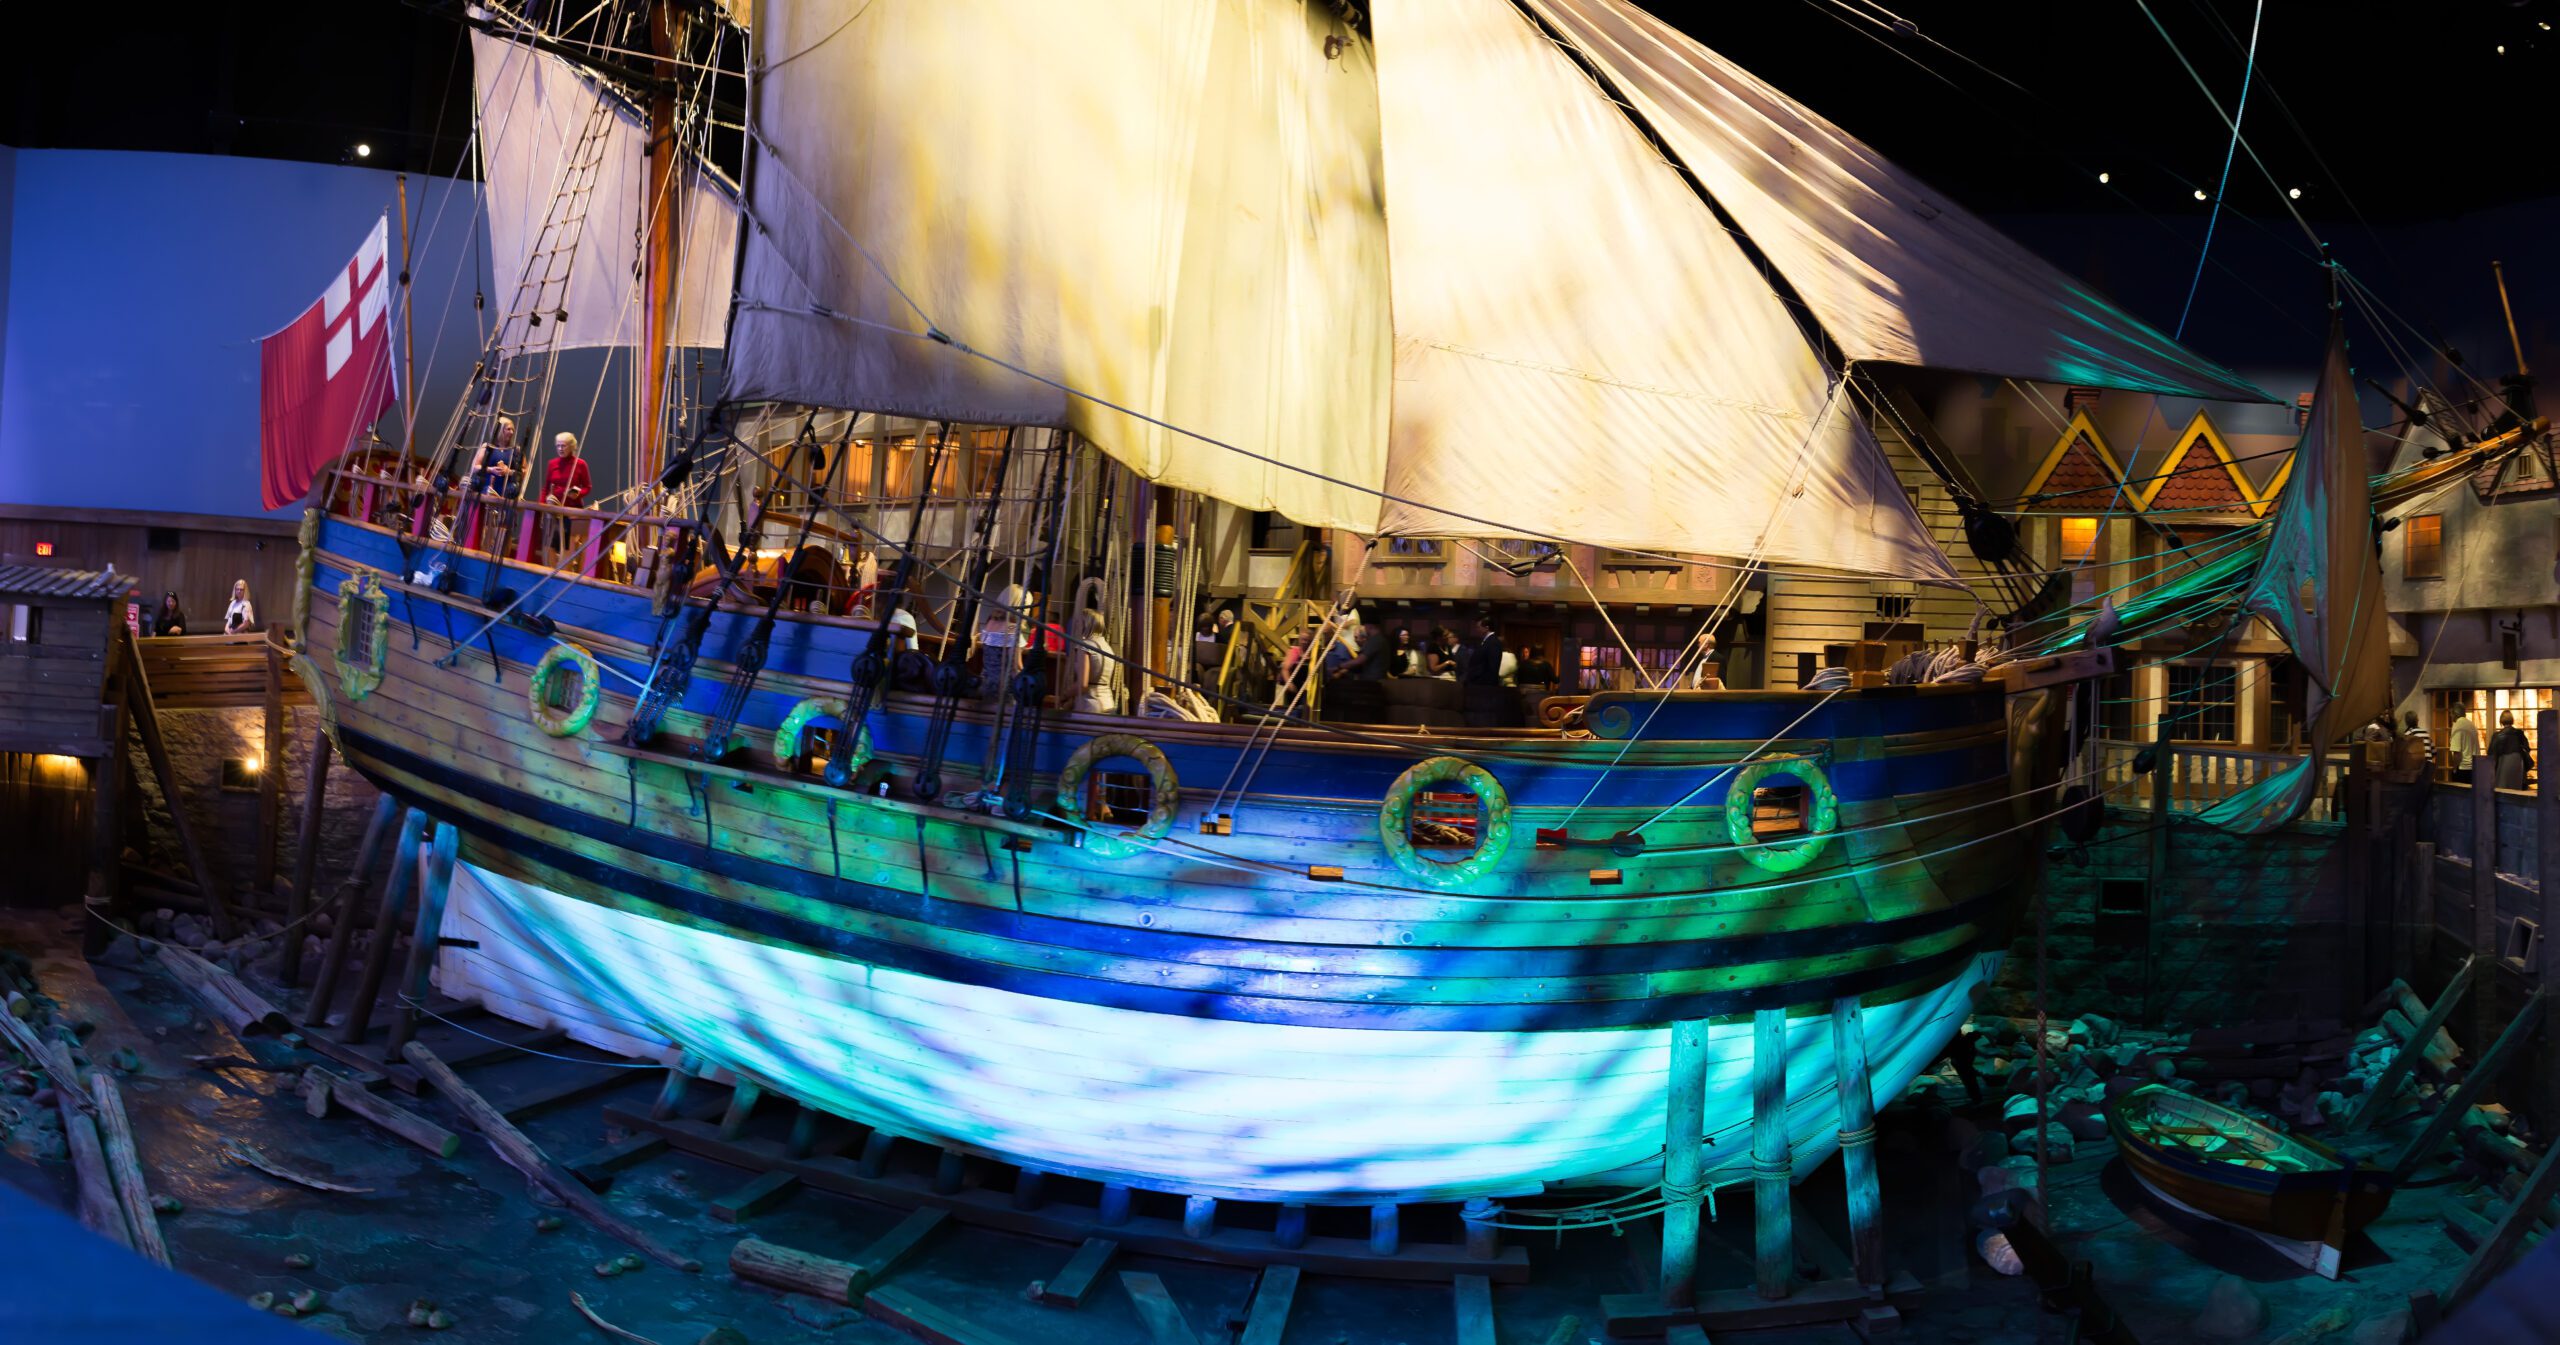 A fish-eye lens view of the Nonsuch, a large wooden ship, lit in blues and whites from below.